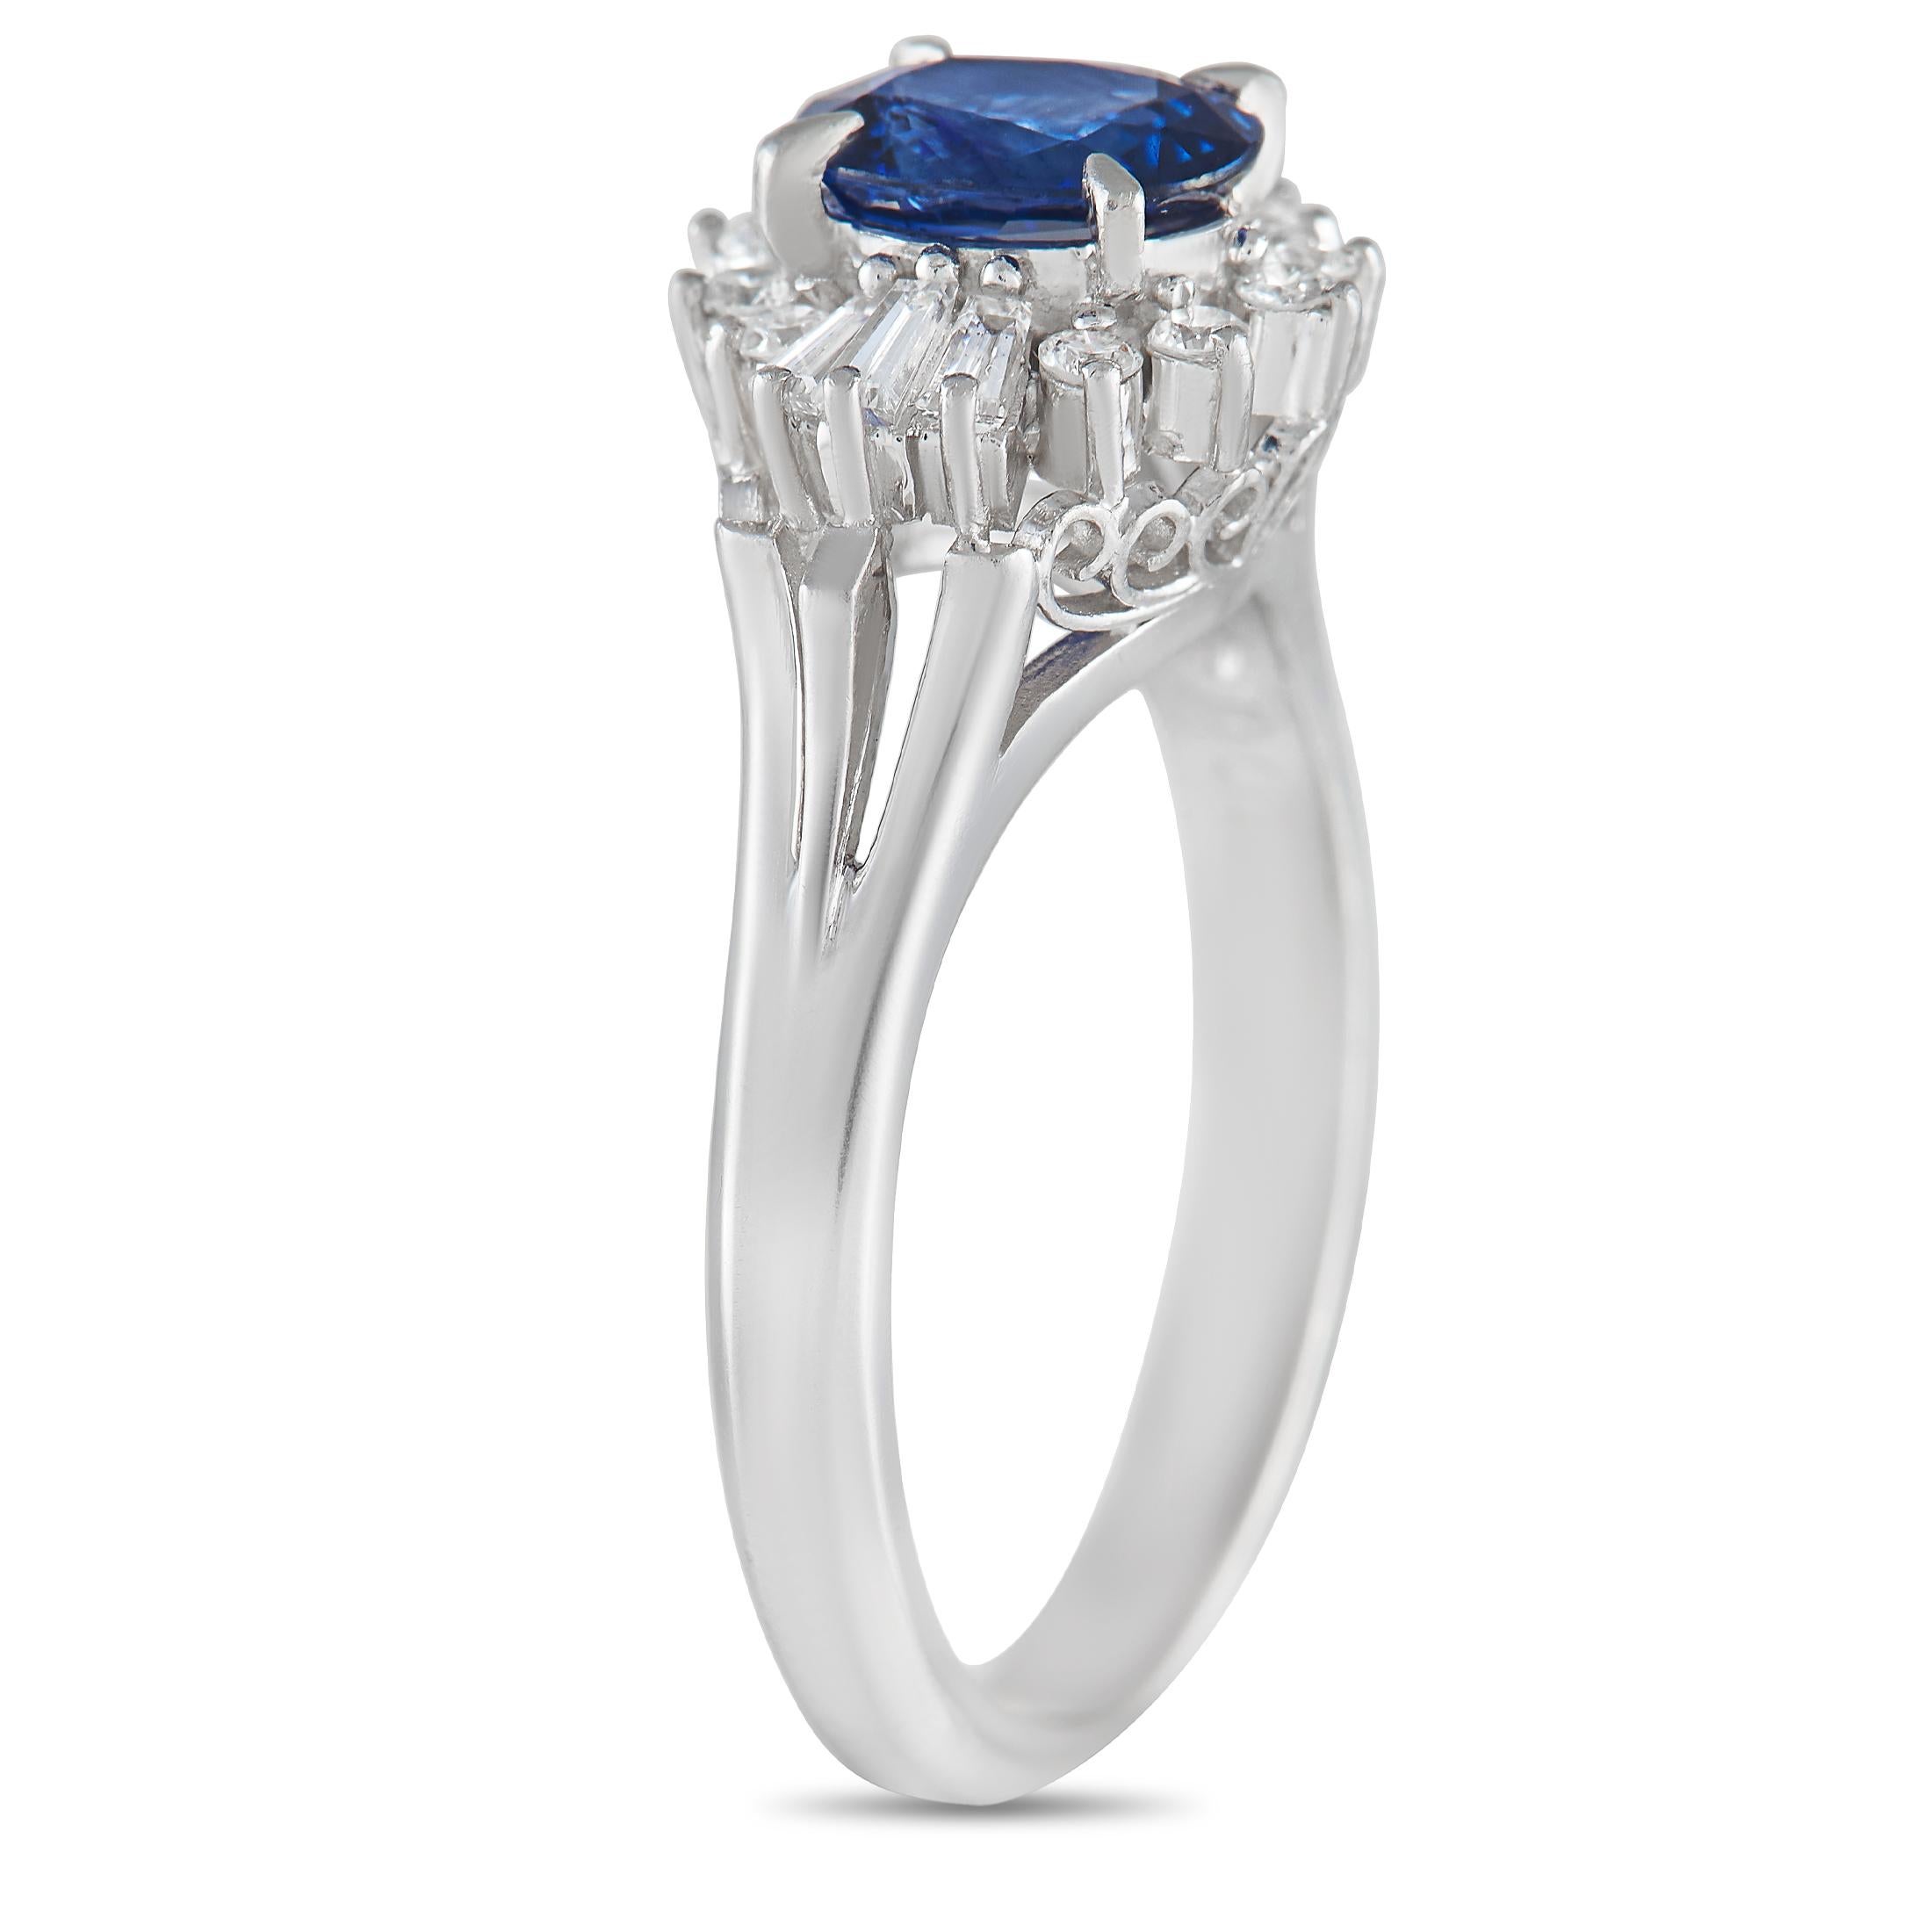 Express your deep love in the color of the deep blue sea through this mesmerizing sapphire and diamond ring. This stunning piece of jewelry features a 1mm slender band topped with a 1.29-carat blue sapphire held in place by four claw prongs. A frame